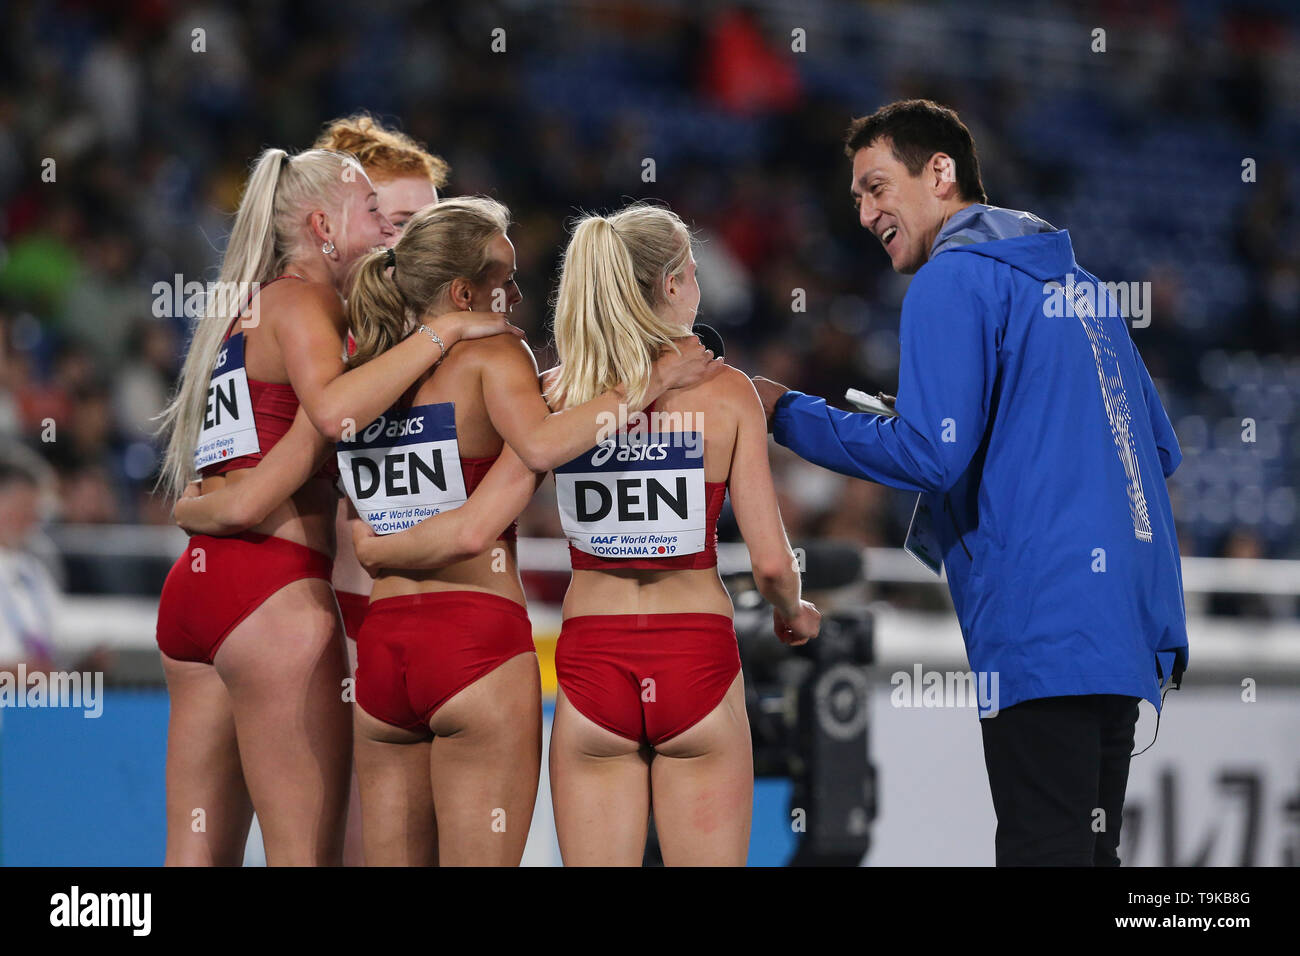 YOKOHAMA, JAPAN - MAY 10: Team Denmark women's 4x100m relay team being interviewed during Day 1 of the 2019 IAAF World Relay Championships at the Nissan Stadium on Saturday May 11, 2019 in Yokohama, Japan. (Photo by Roger Sedres for the IAAF) Stock Photo